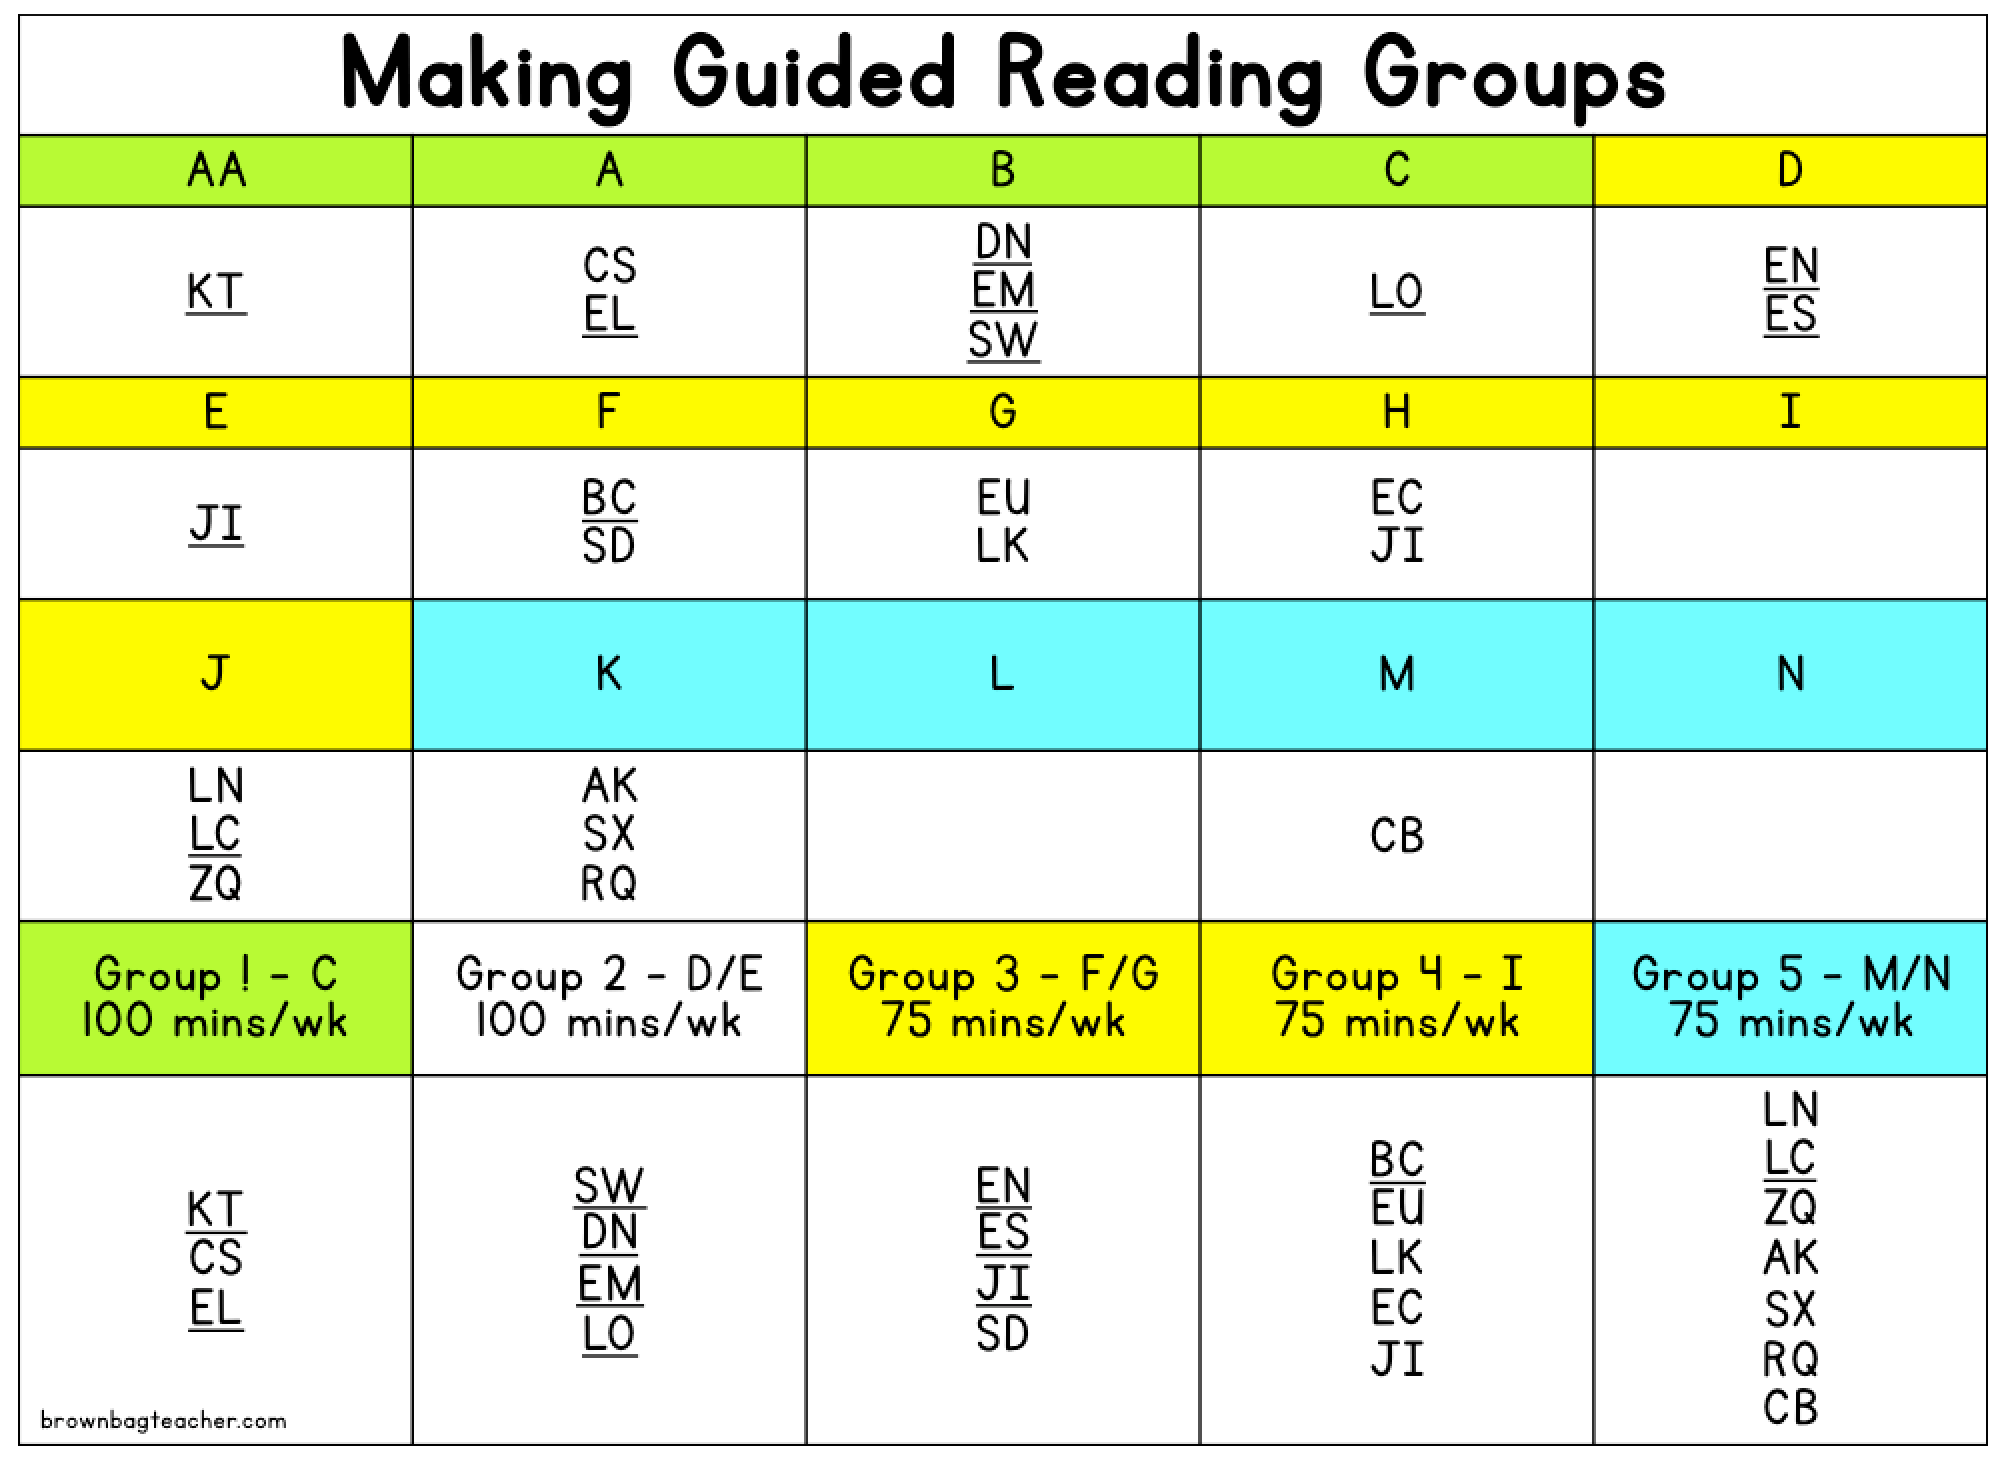 Guided Reading offers students intentional reading instruction with texts that are just a little too hard! From lesson planning to benchmarking students to word work activities, check out these awesome ideas to make Guided Reading work! 